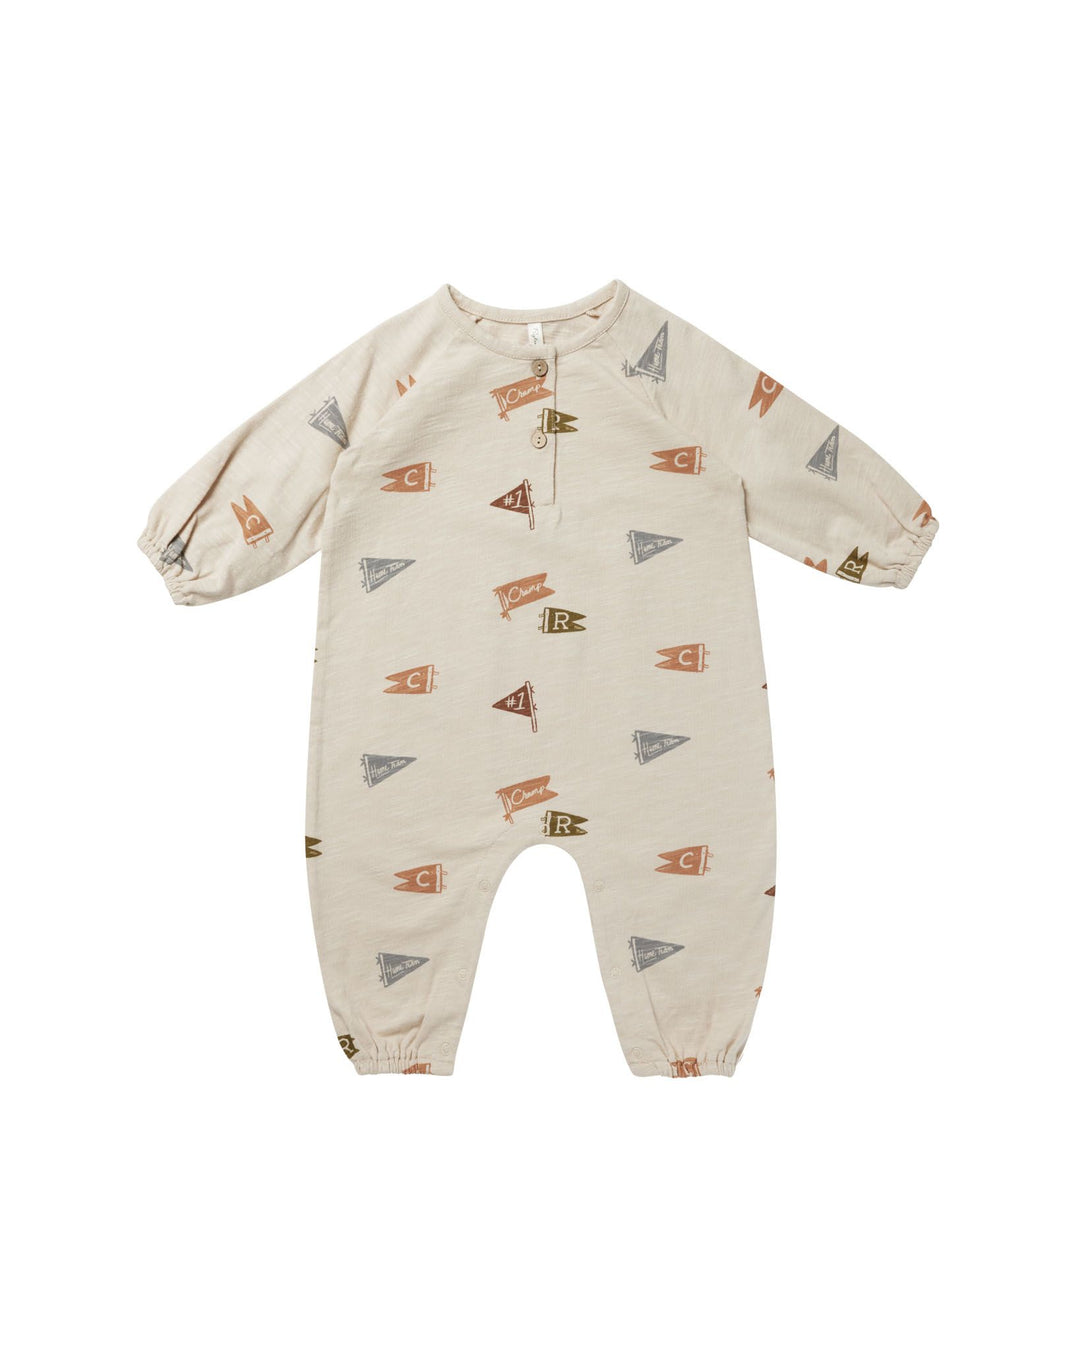 Henley Flags Jumpsuit by Rylee and Cru